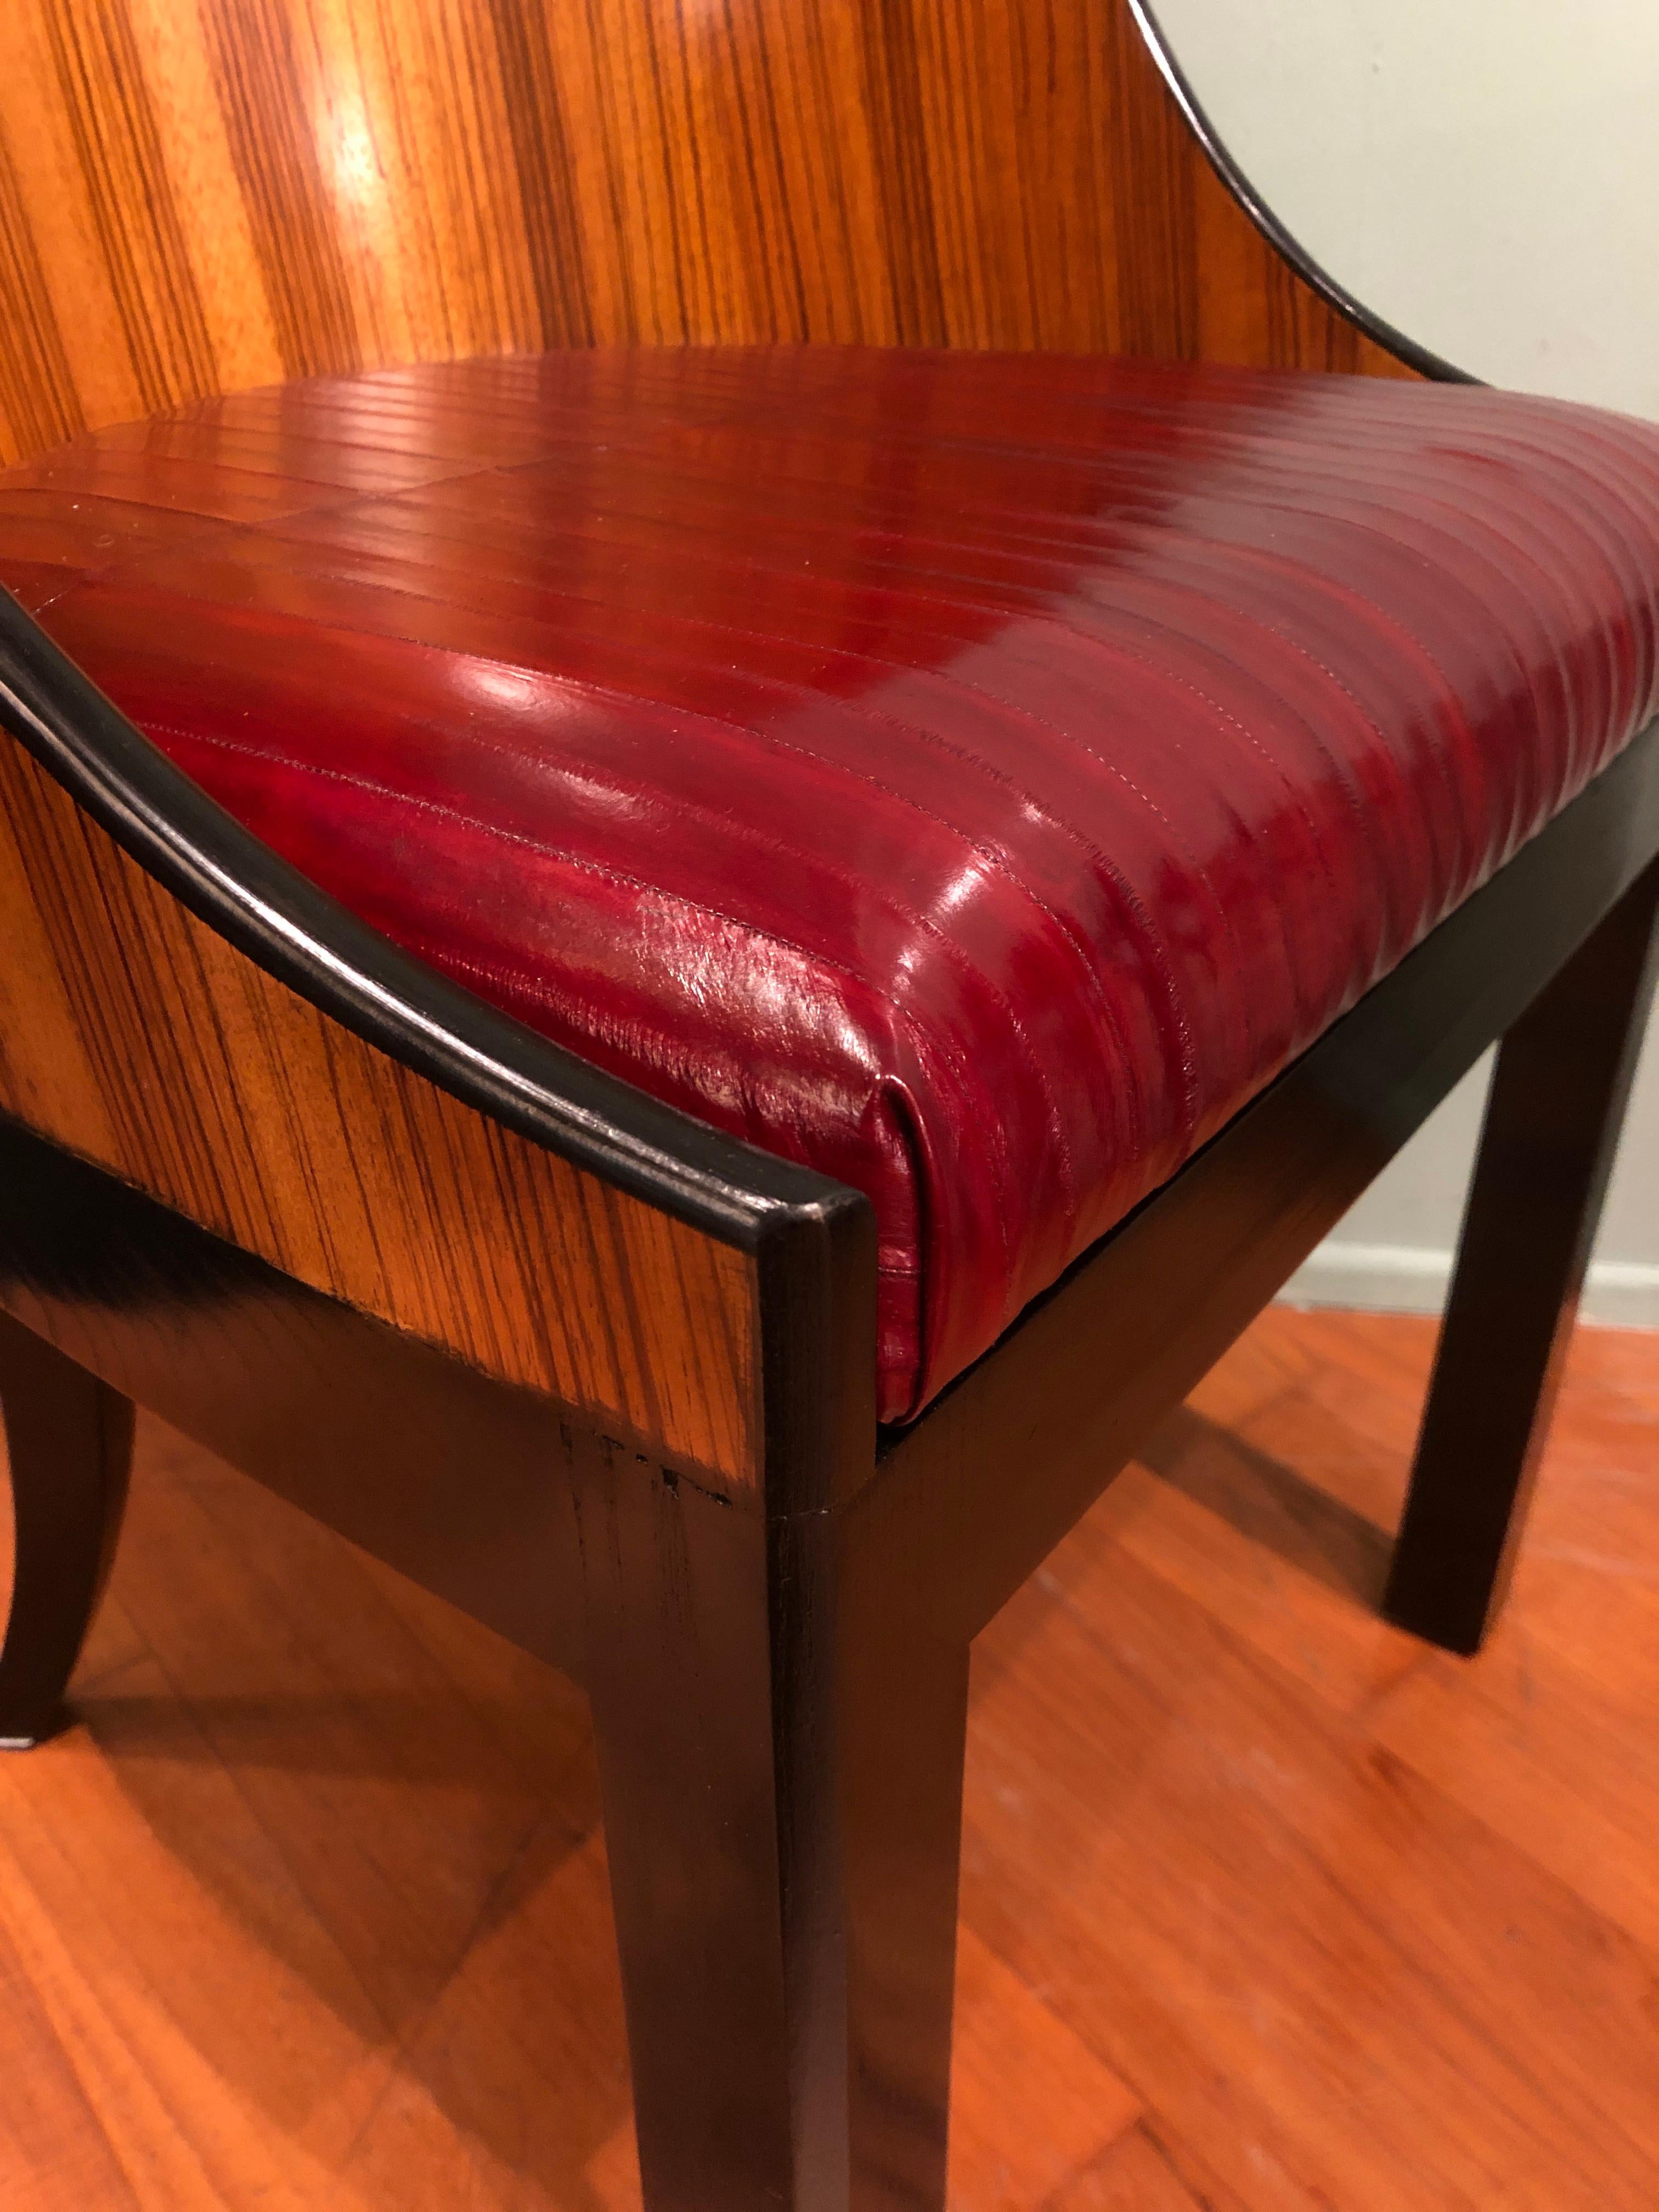 Contemporary Customizable Zebrano Wood Red Leather Seats and Black Details Saber Legs Chairs